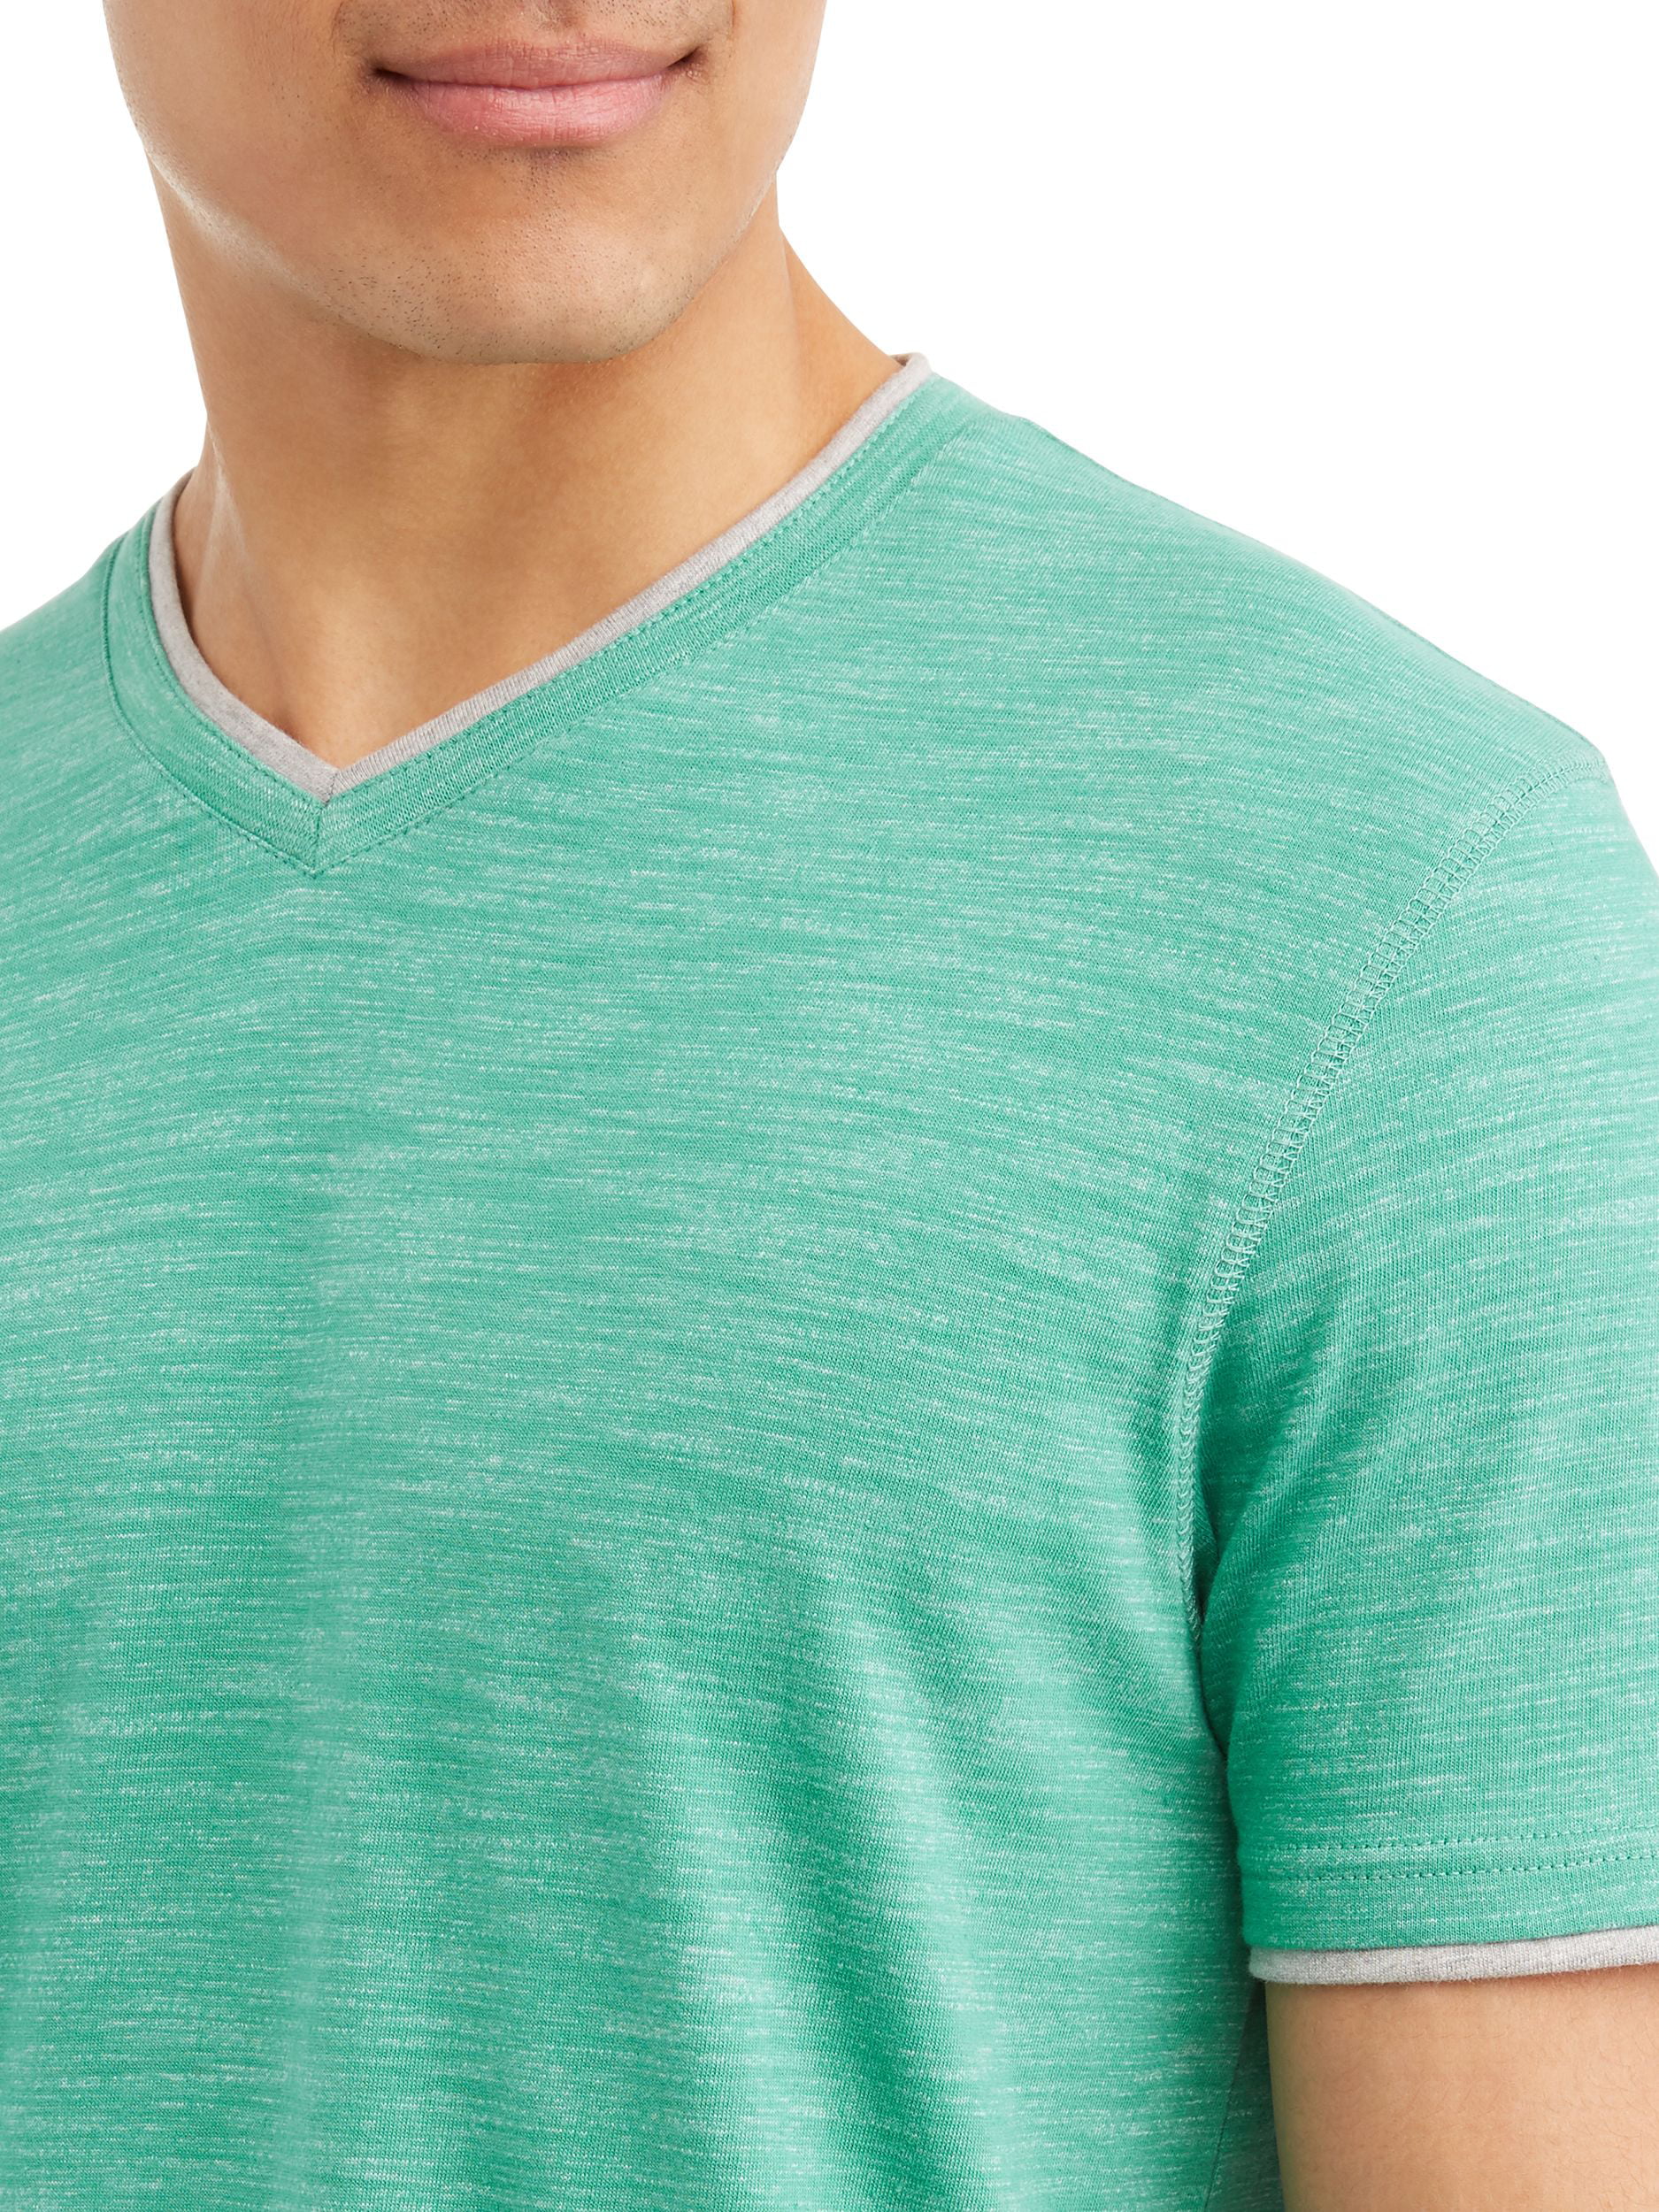 Lee Men's Short Sleeve Textured Jersey V-Neck Tee, Available up to size 2XL